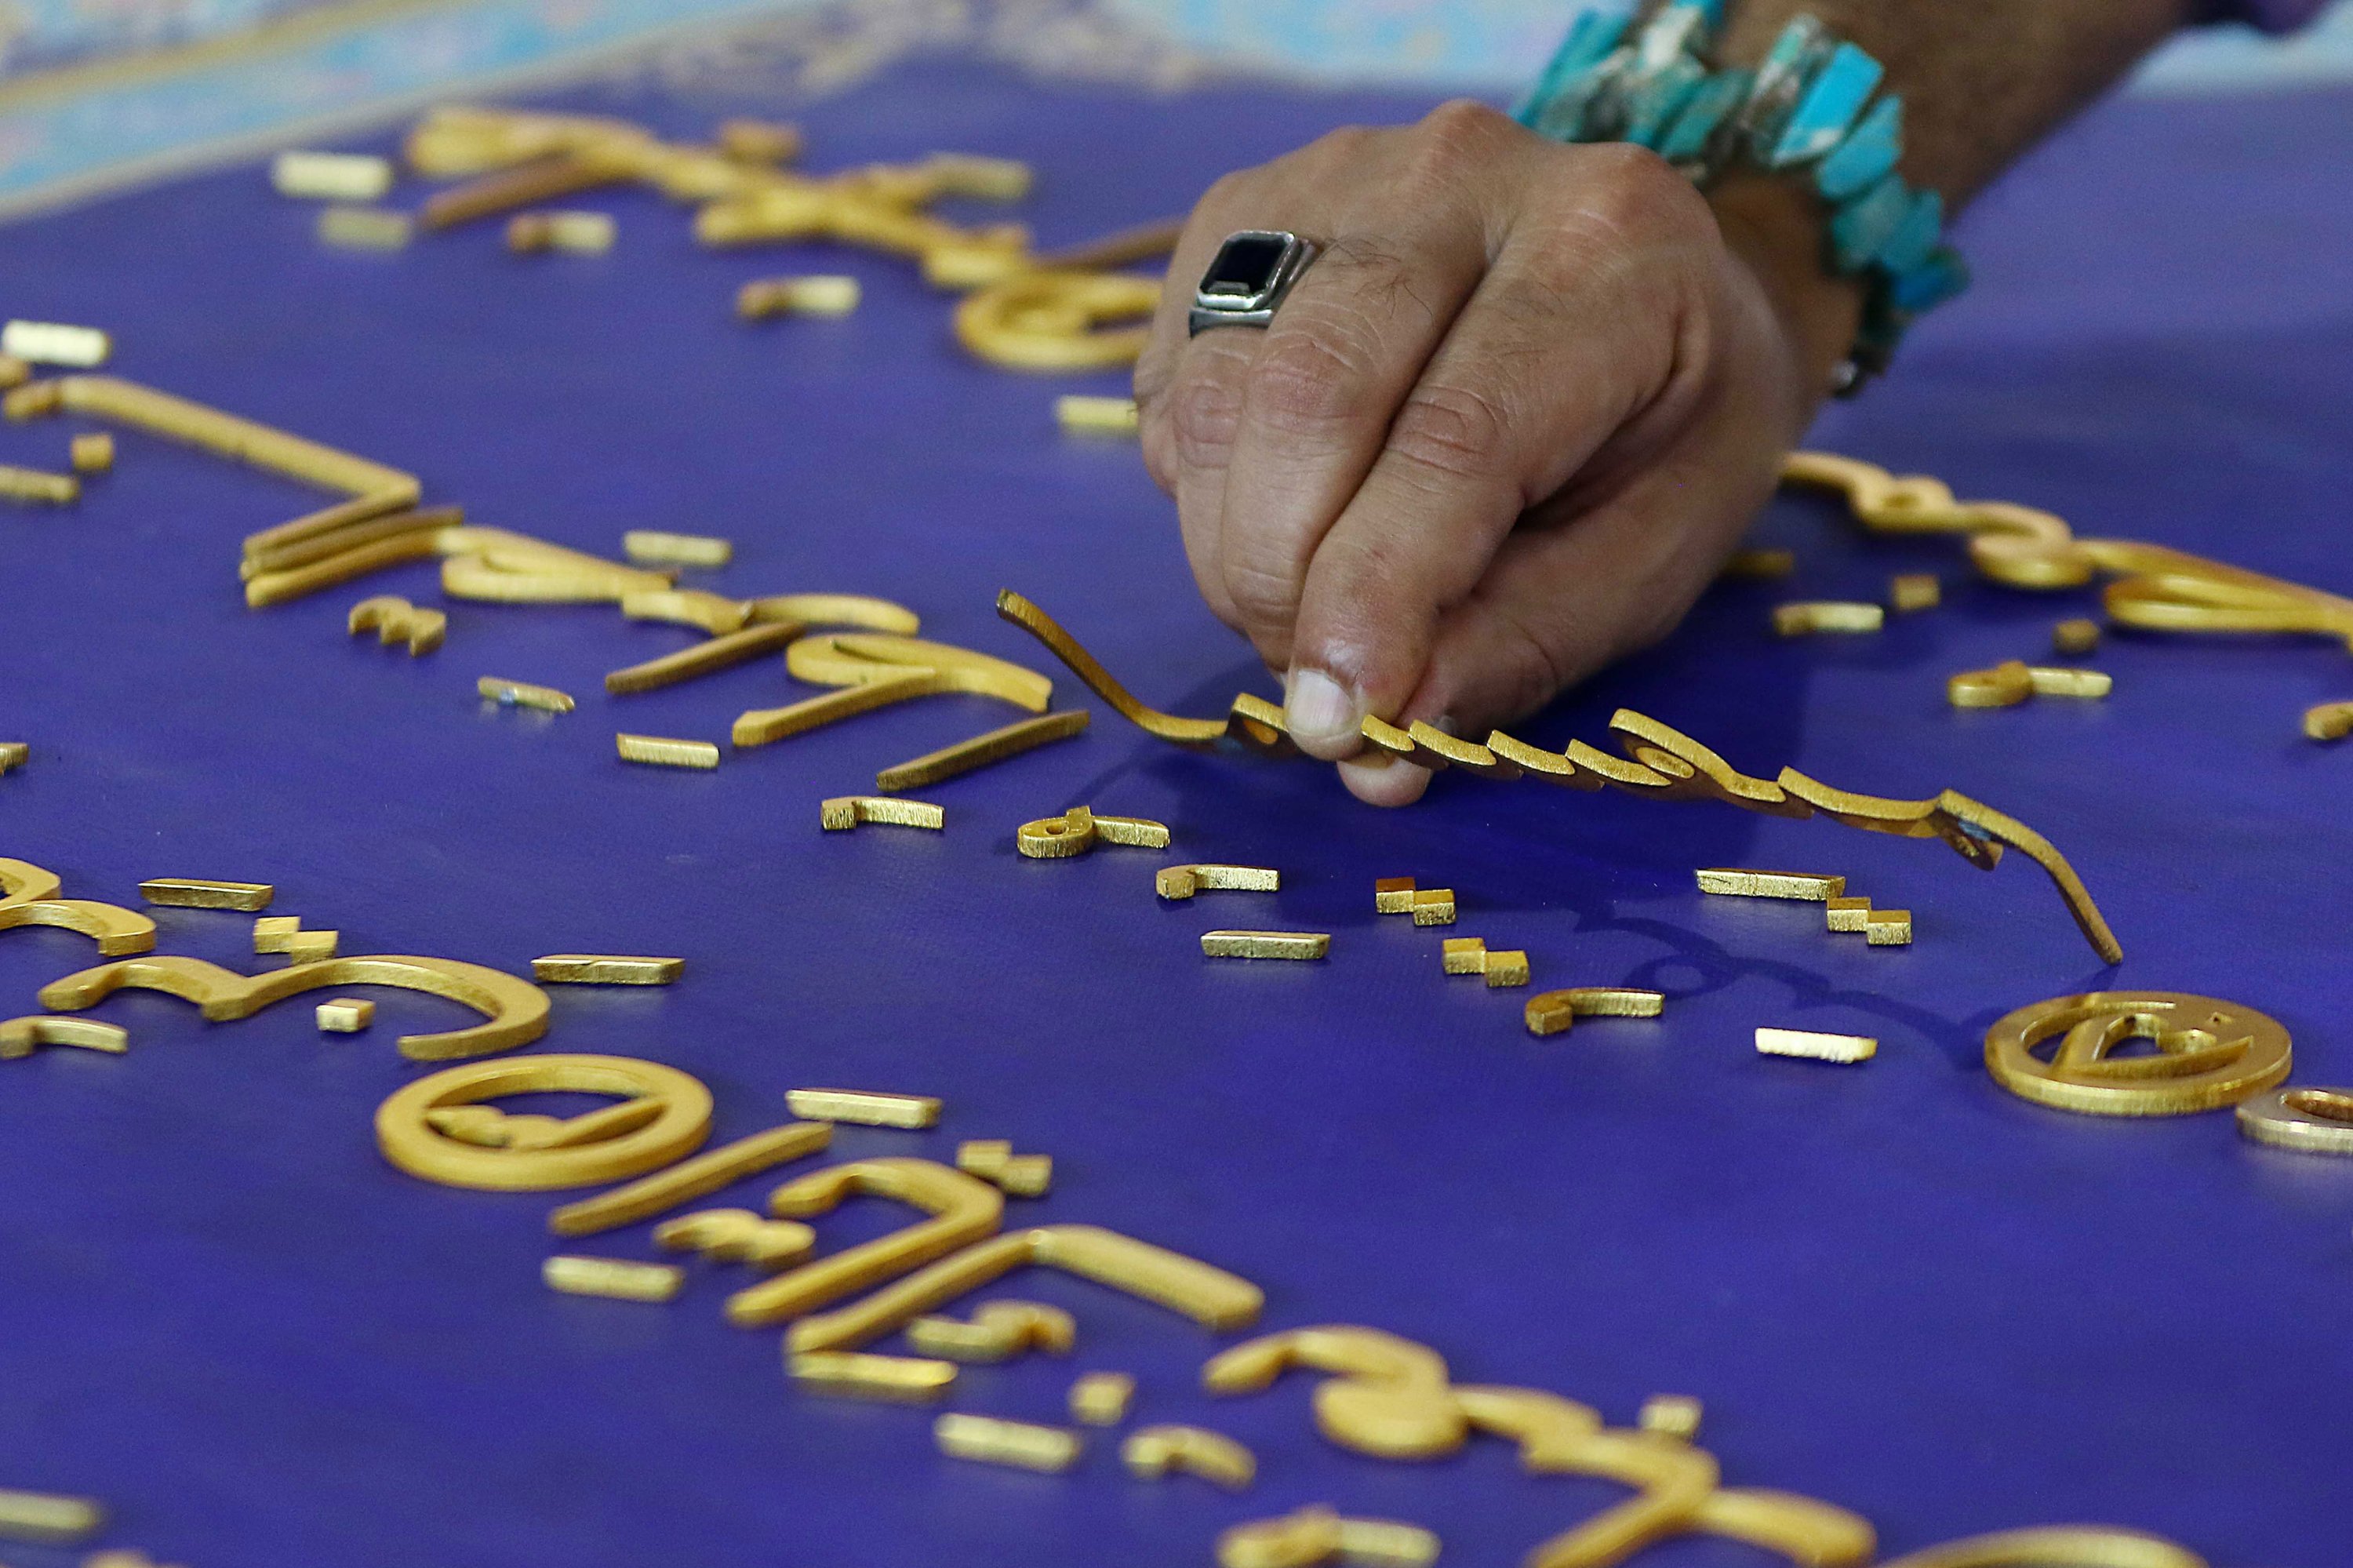 Pakistani artist Shahid Rassam works on the calligraphy of Quran verses on canvas with aluminum and gold-plated words. (EPA Photo) 